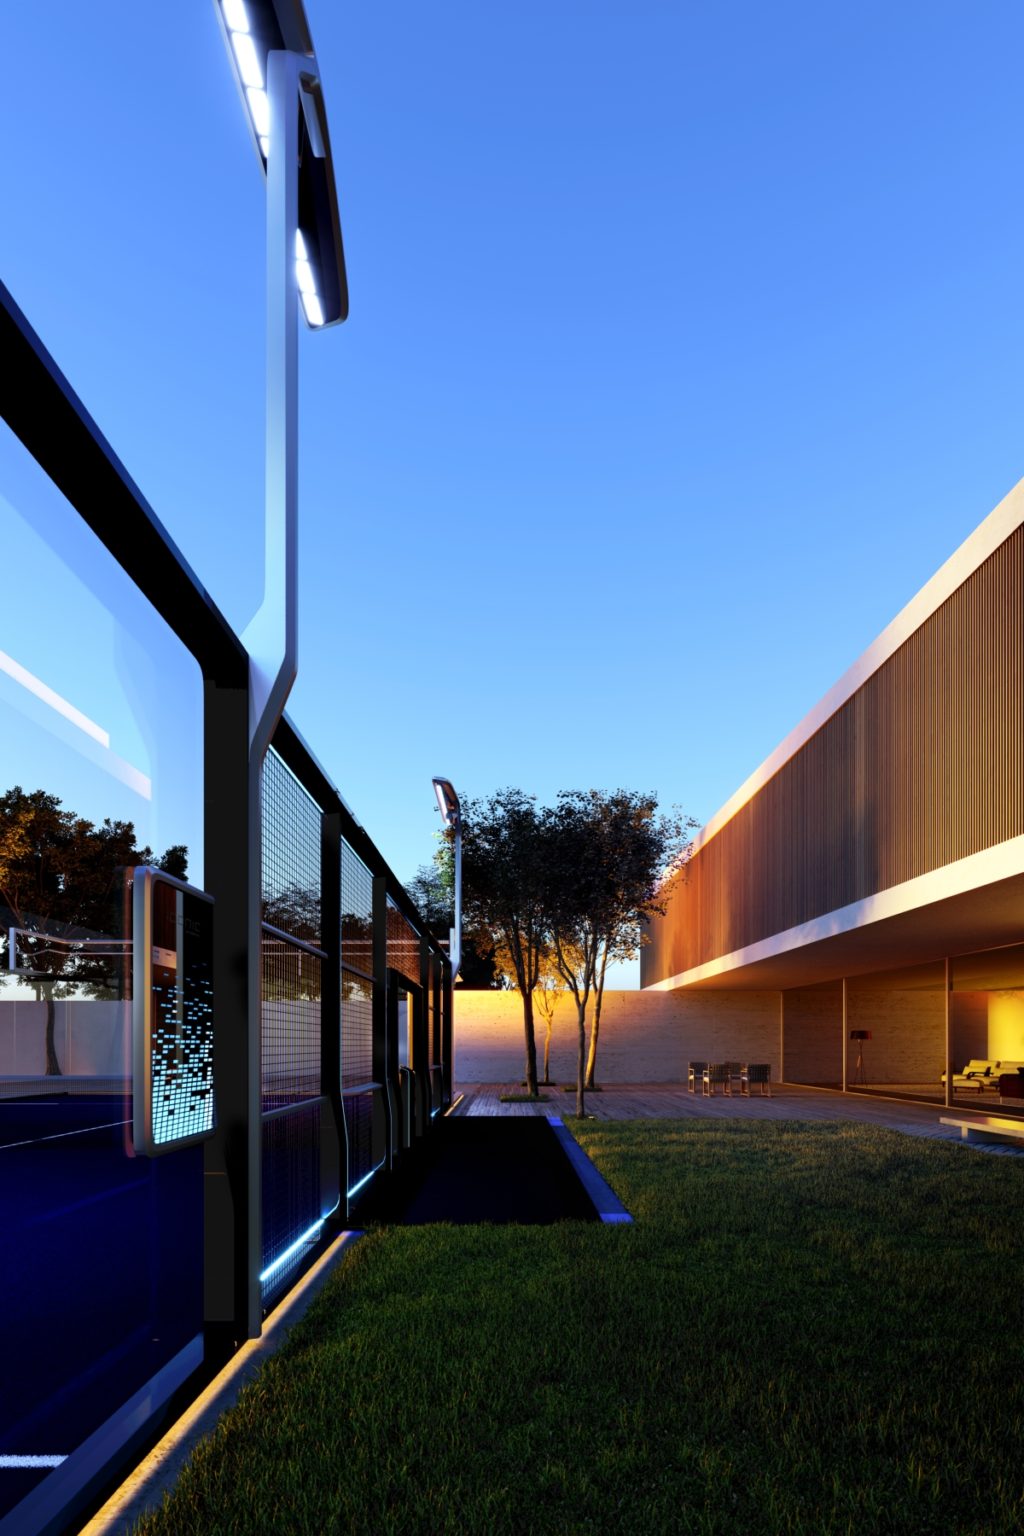 The padel court of the future. Iconic Padel Court. Pininfarina Architecture and Iconic